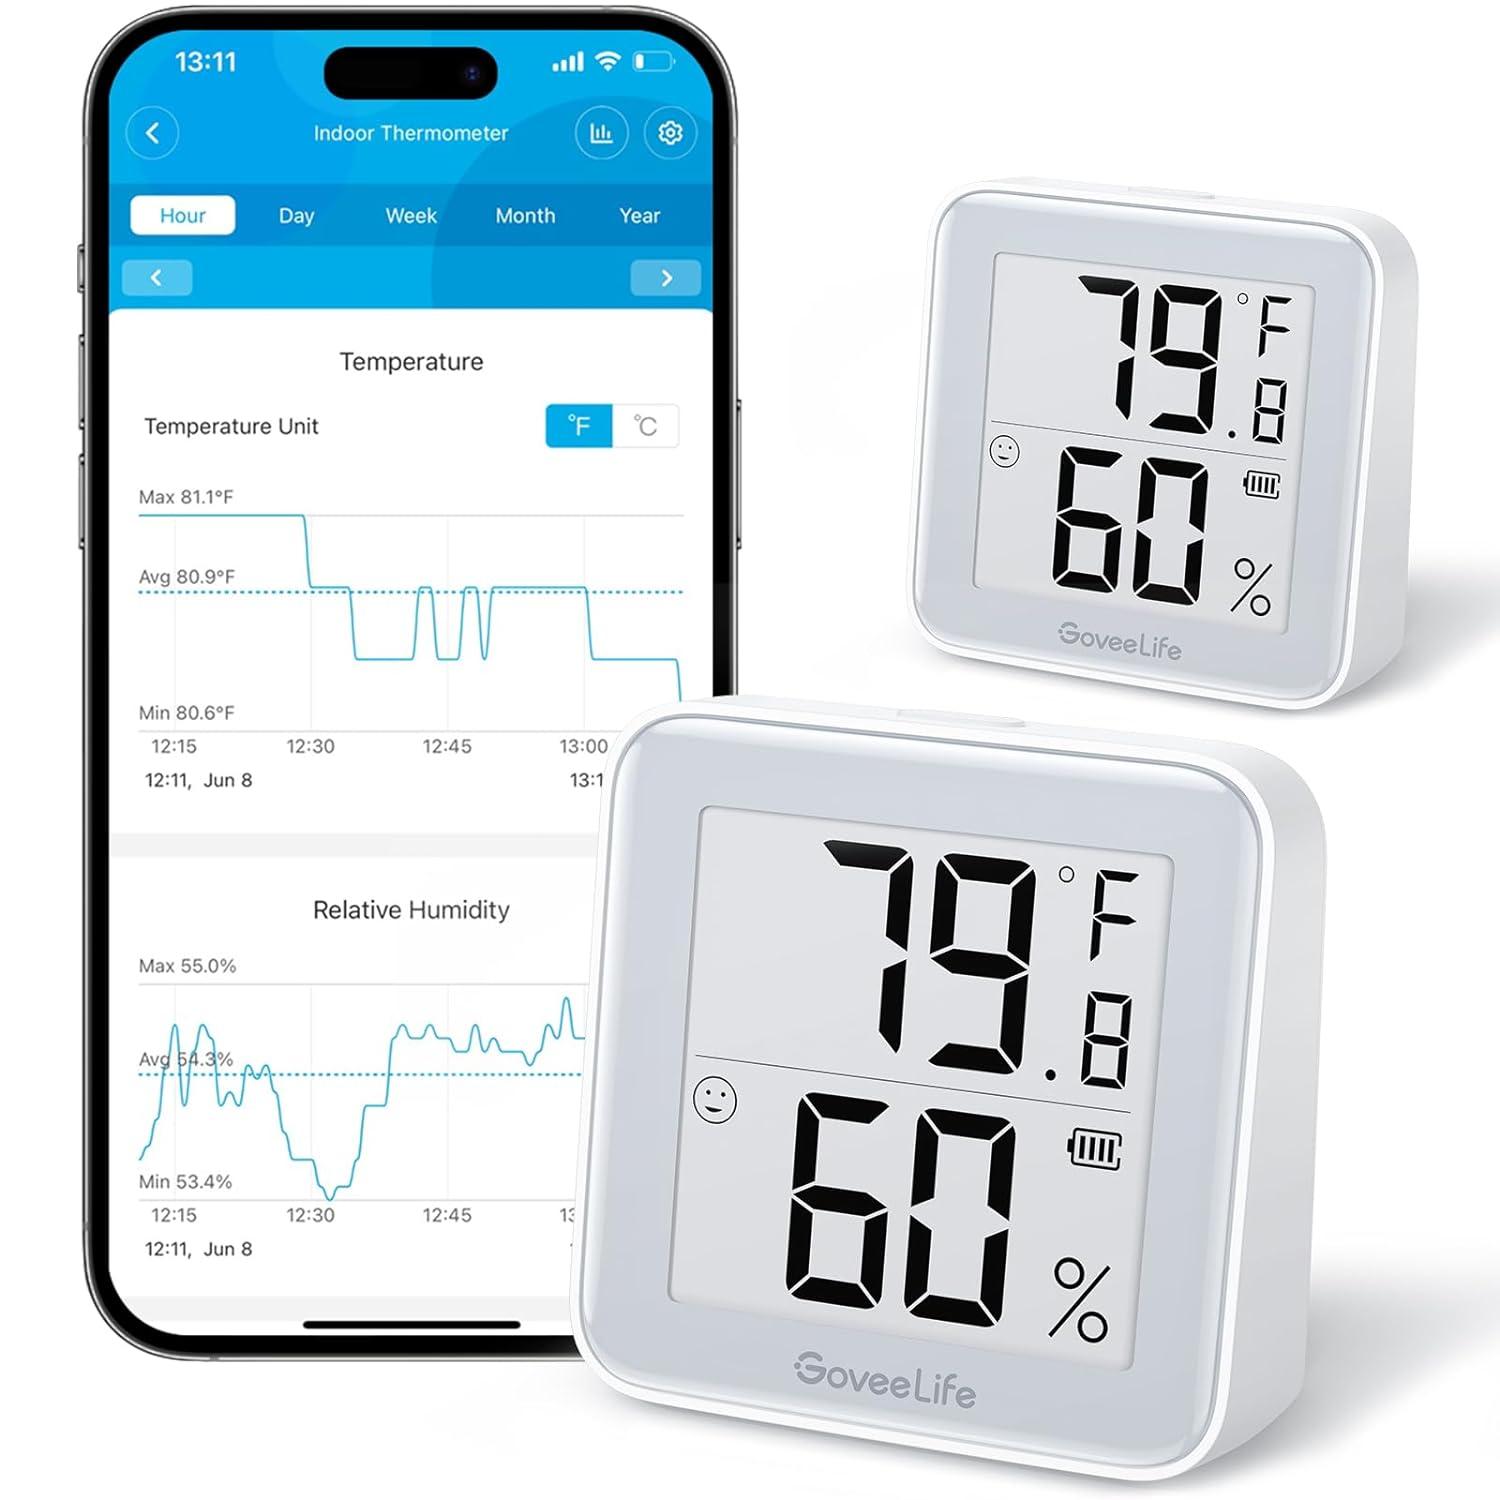 GoveeLife E-Ink Bluetooth Thermometer Hygrometer 2 Pack for $17.59